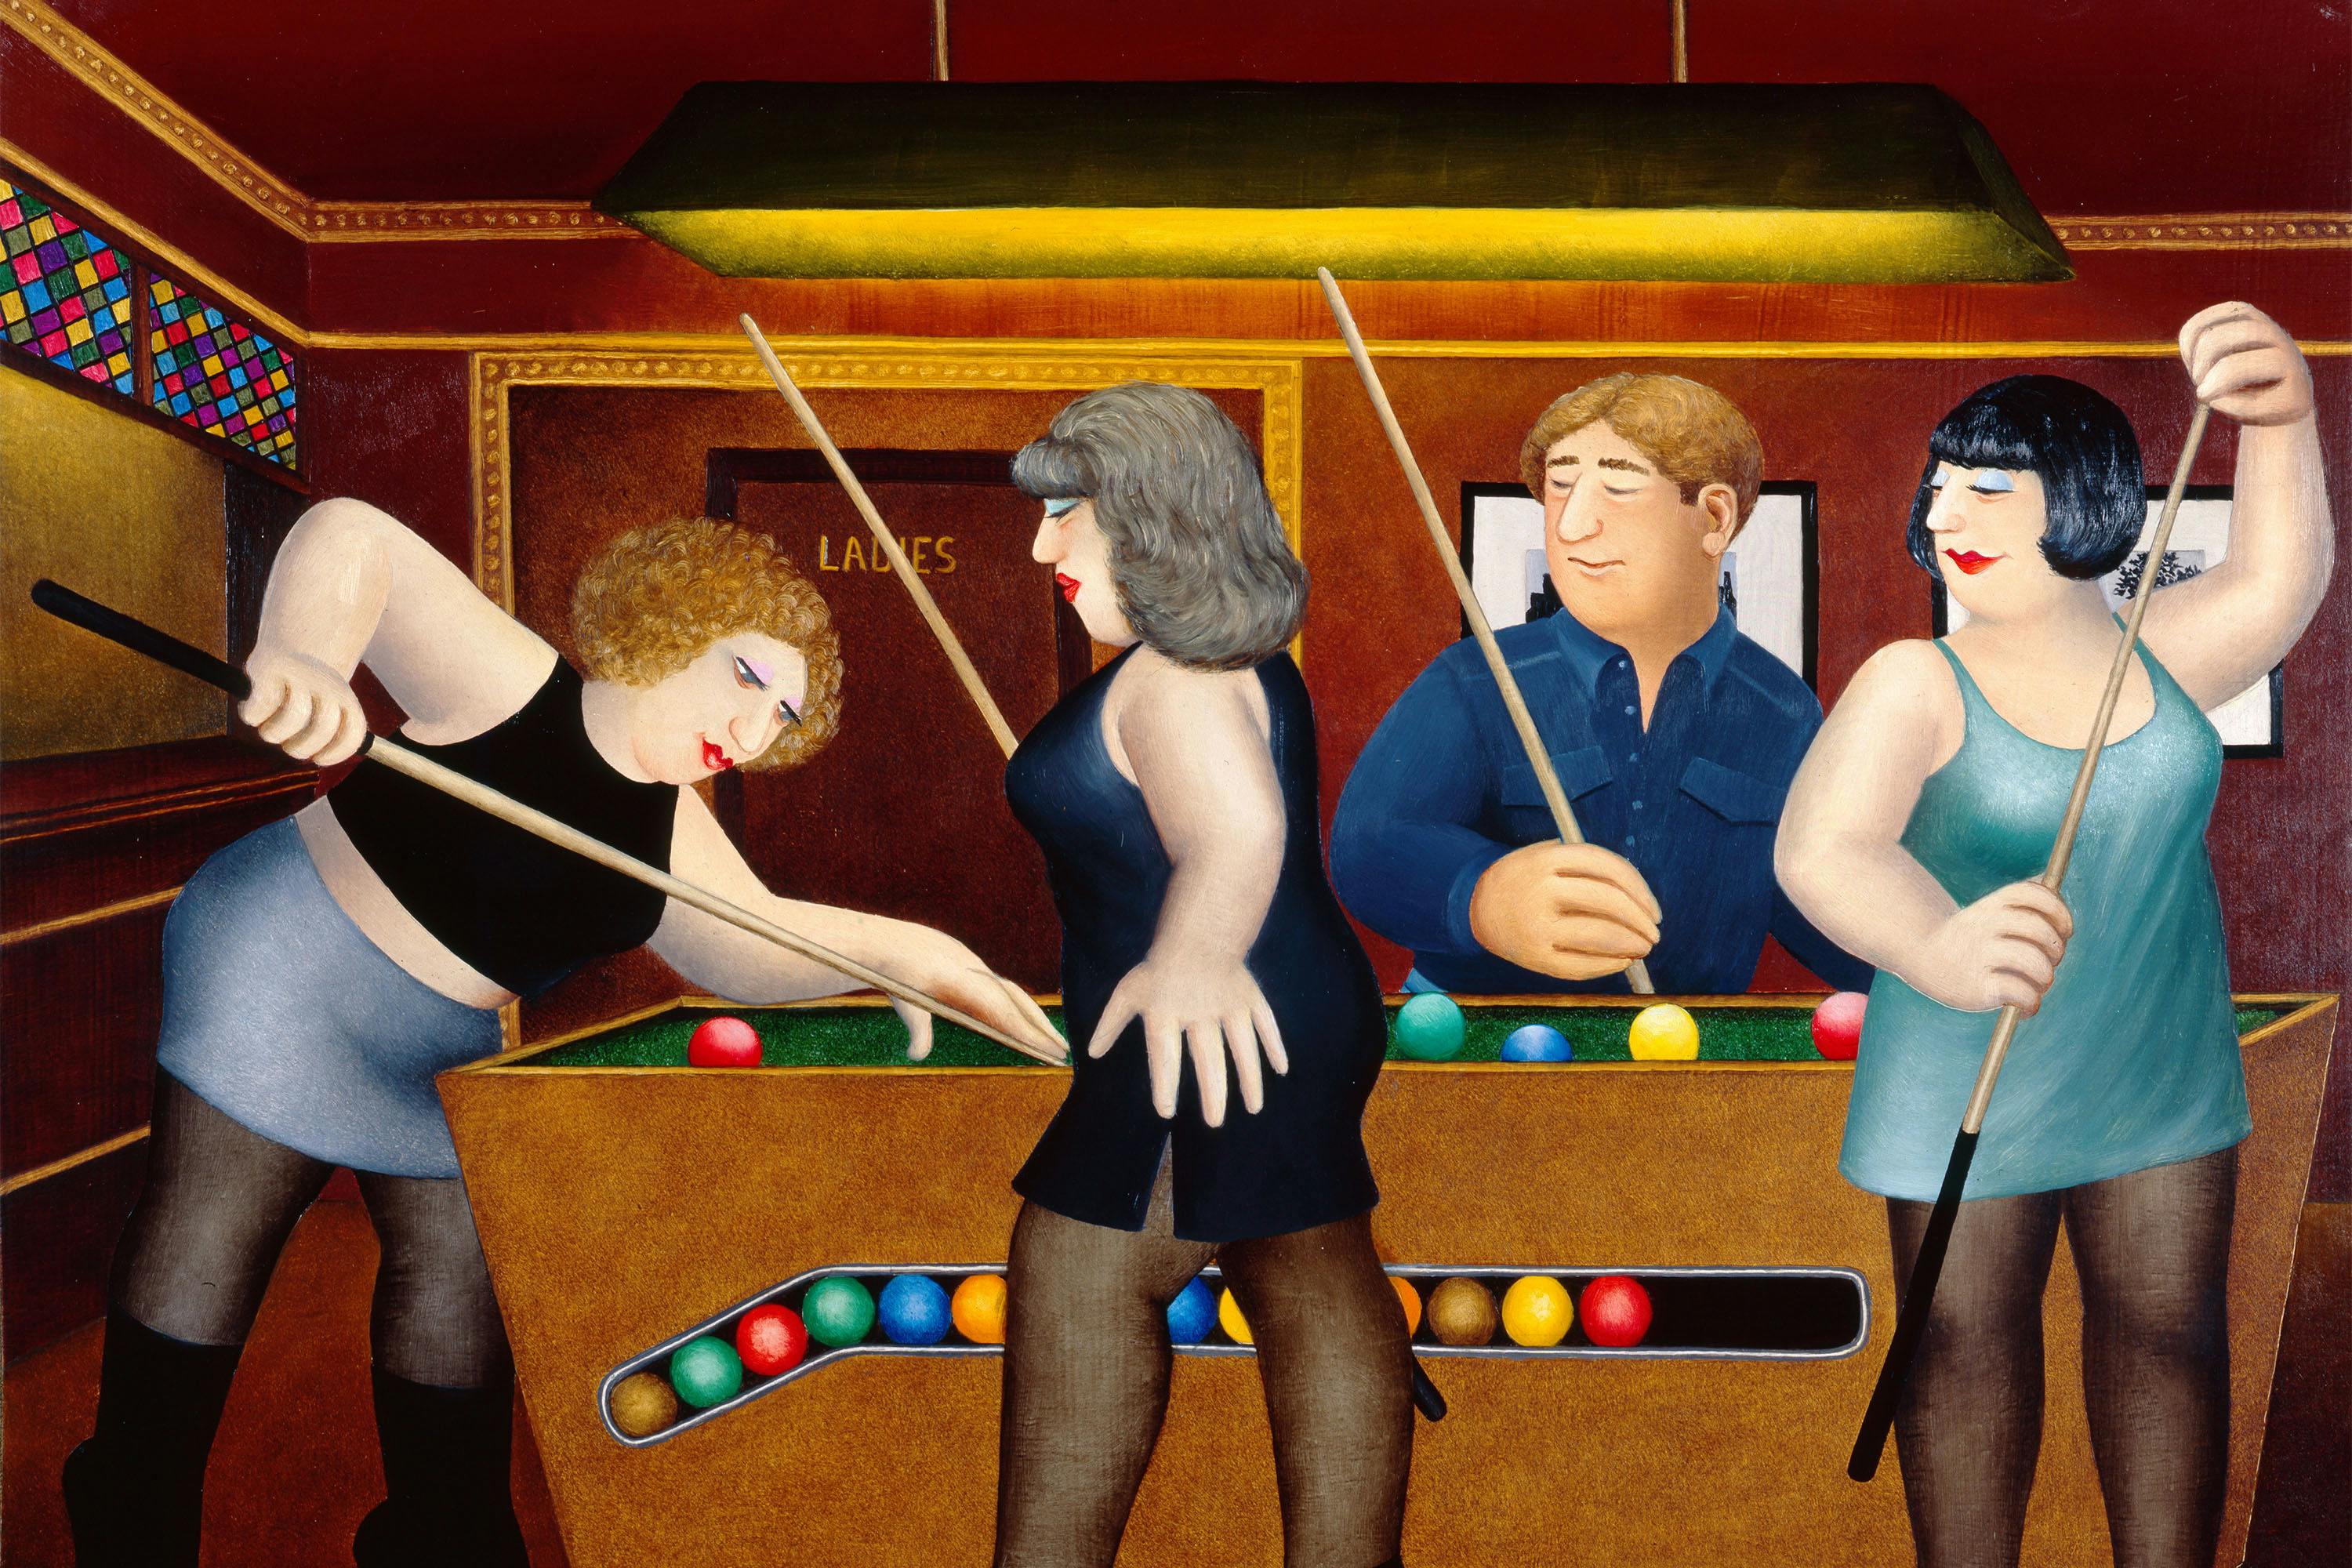 A Beryl Cook painting depicting four well-rounded people, one man and three women, playing a game of billiards in a bar